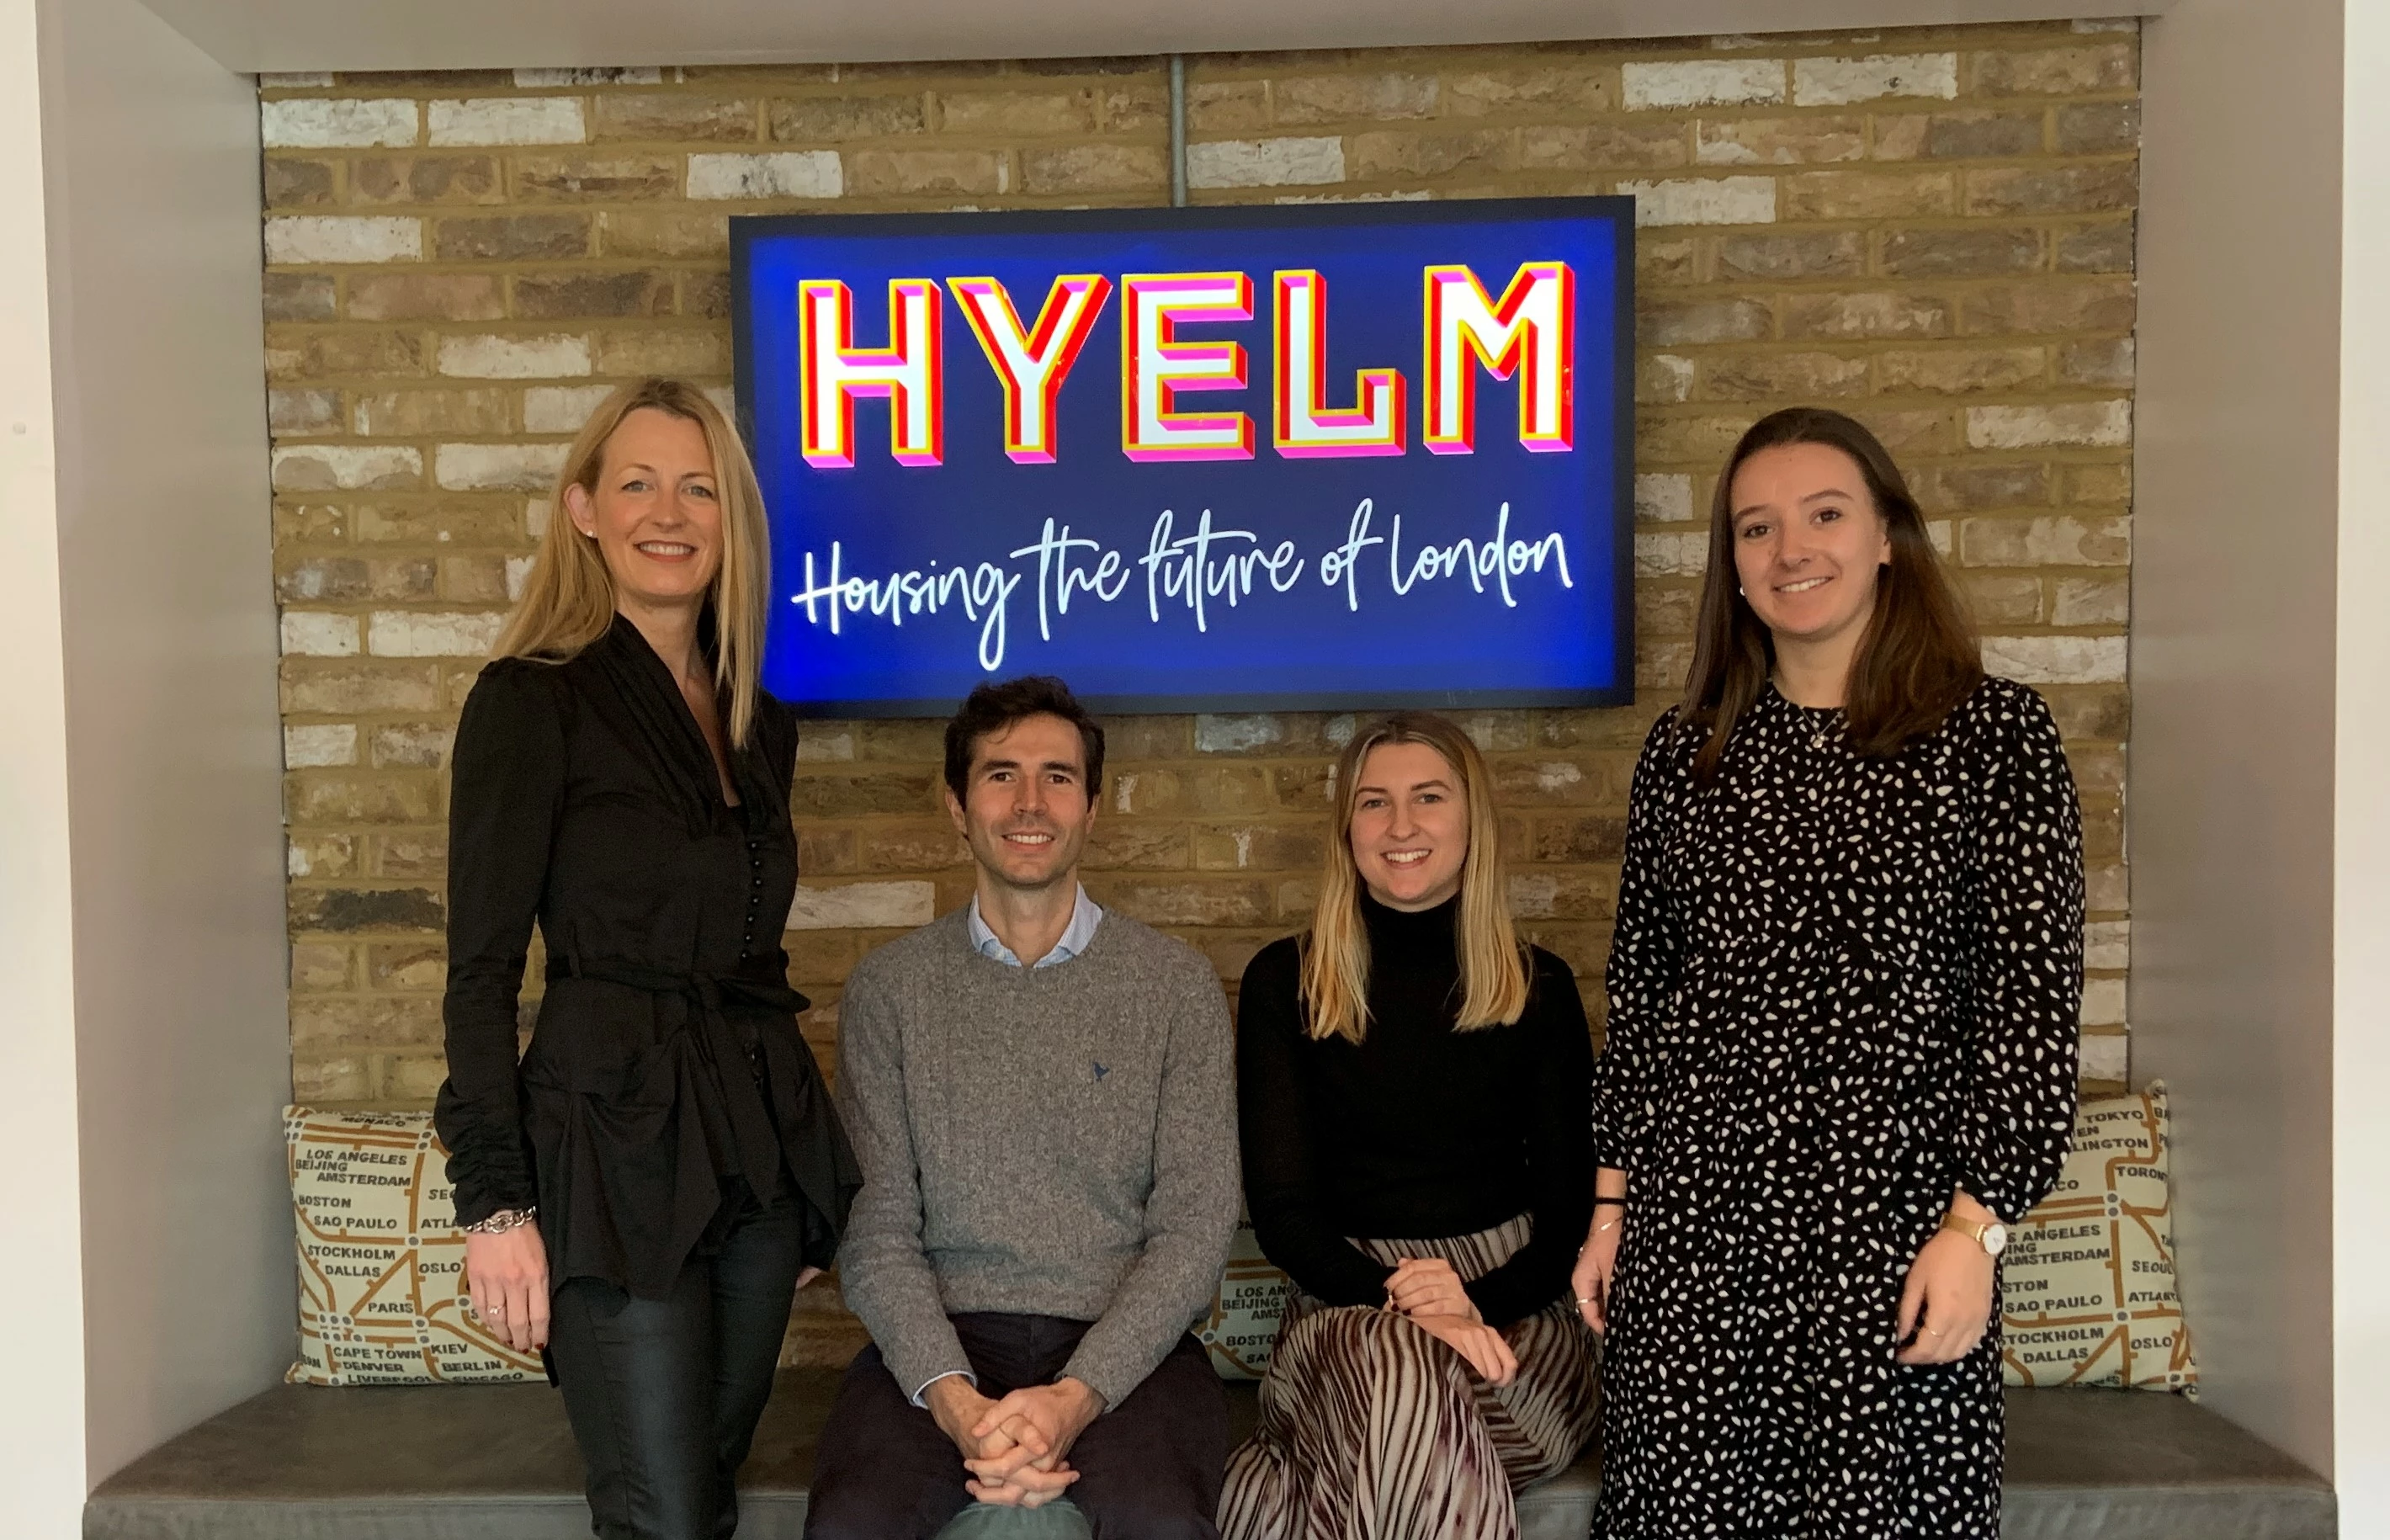 The HYELM team at Lucre